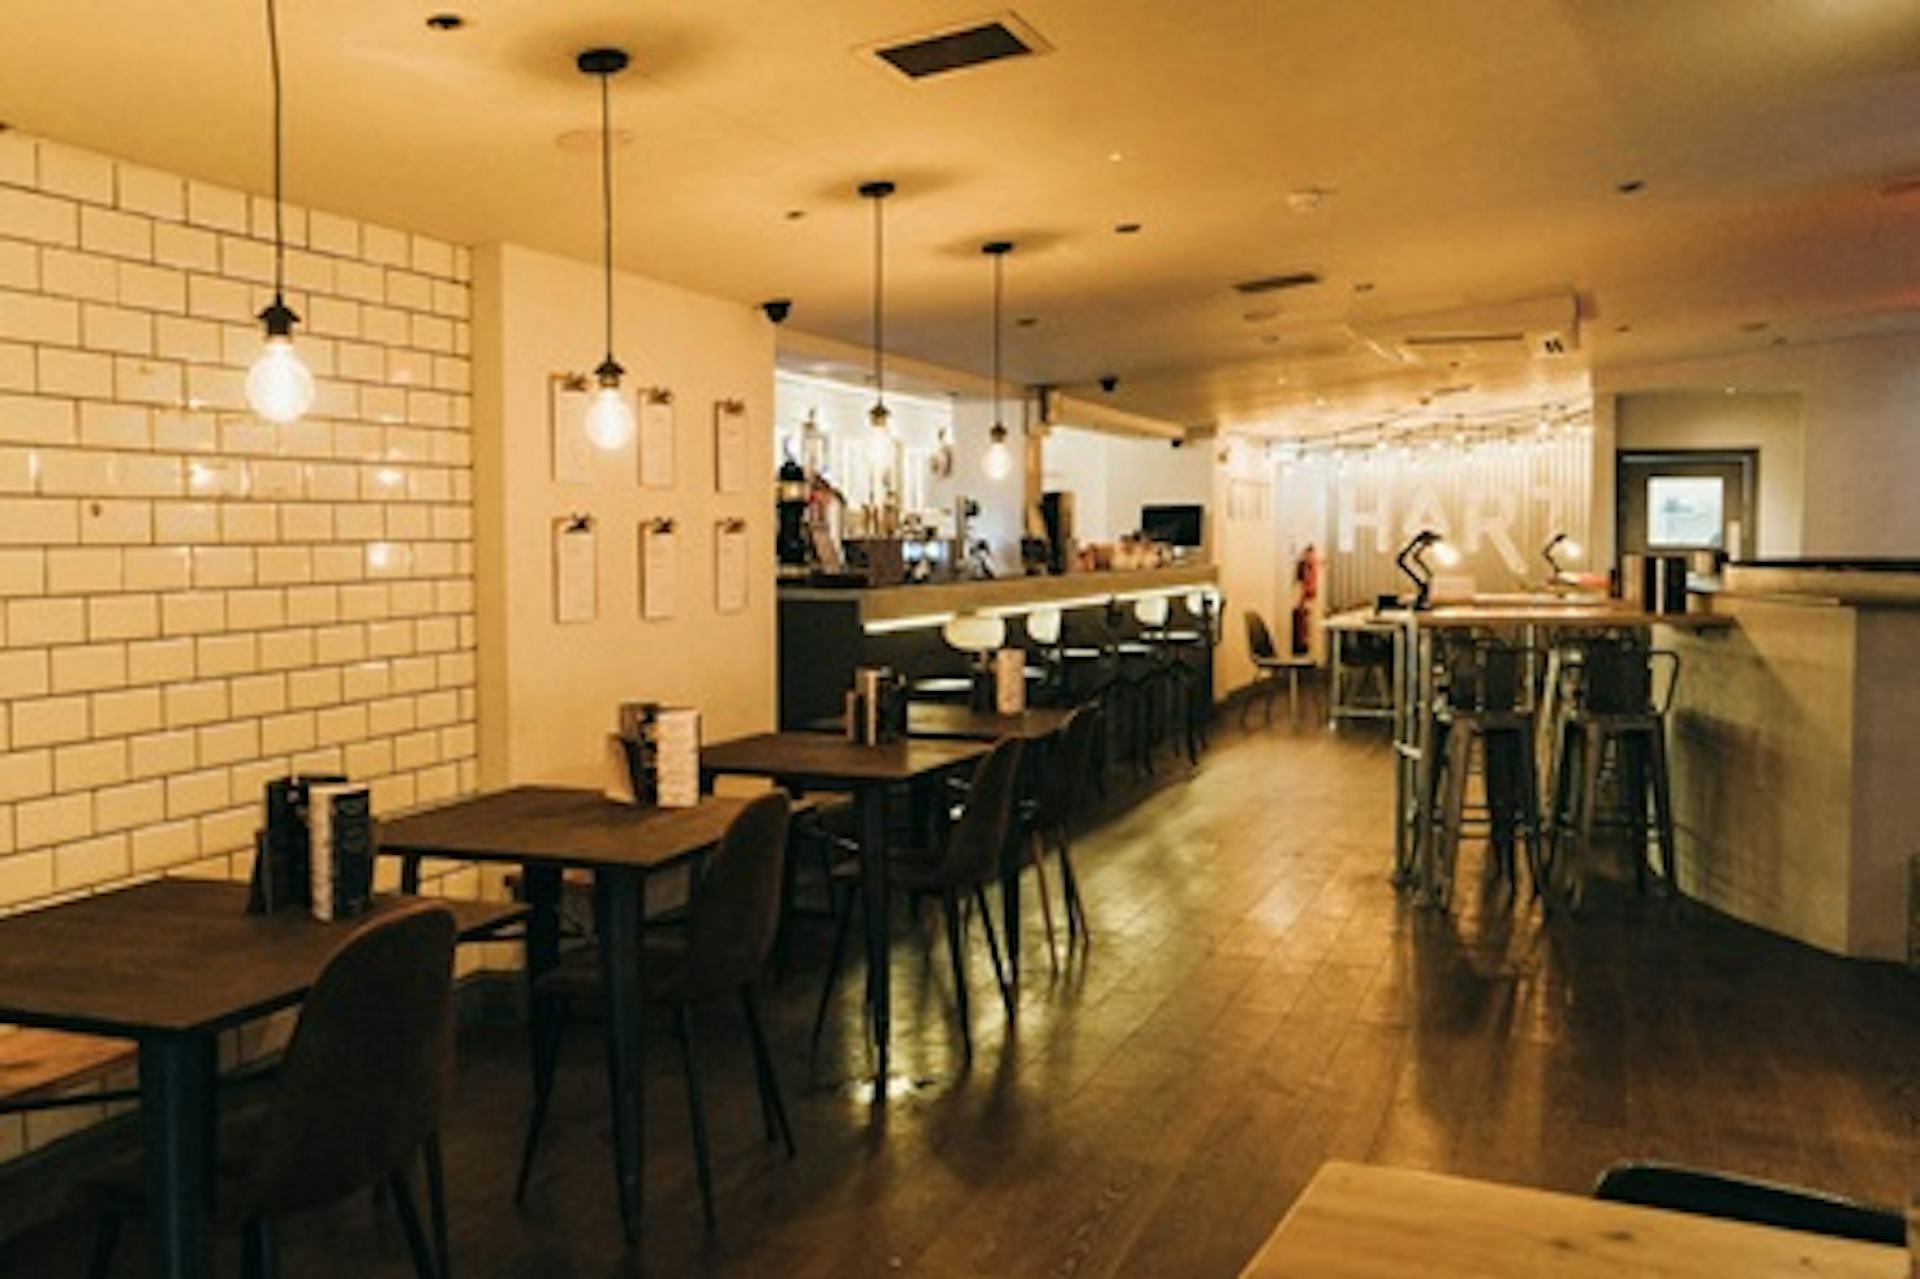 Free-Flowing Prosecco Brunch for Two at Hart + Co